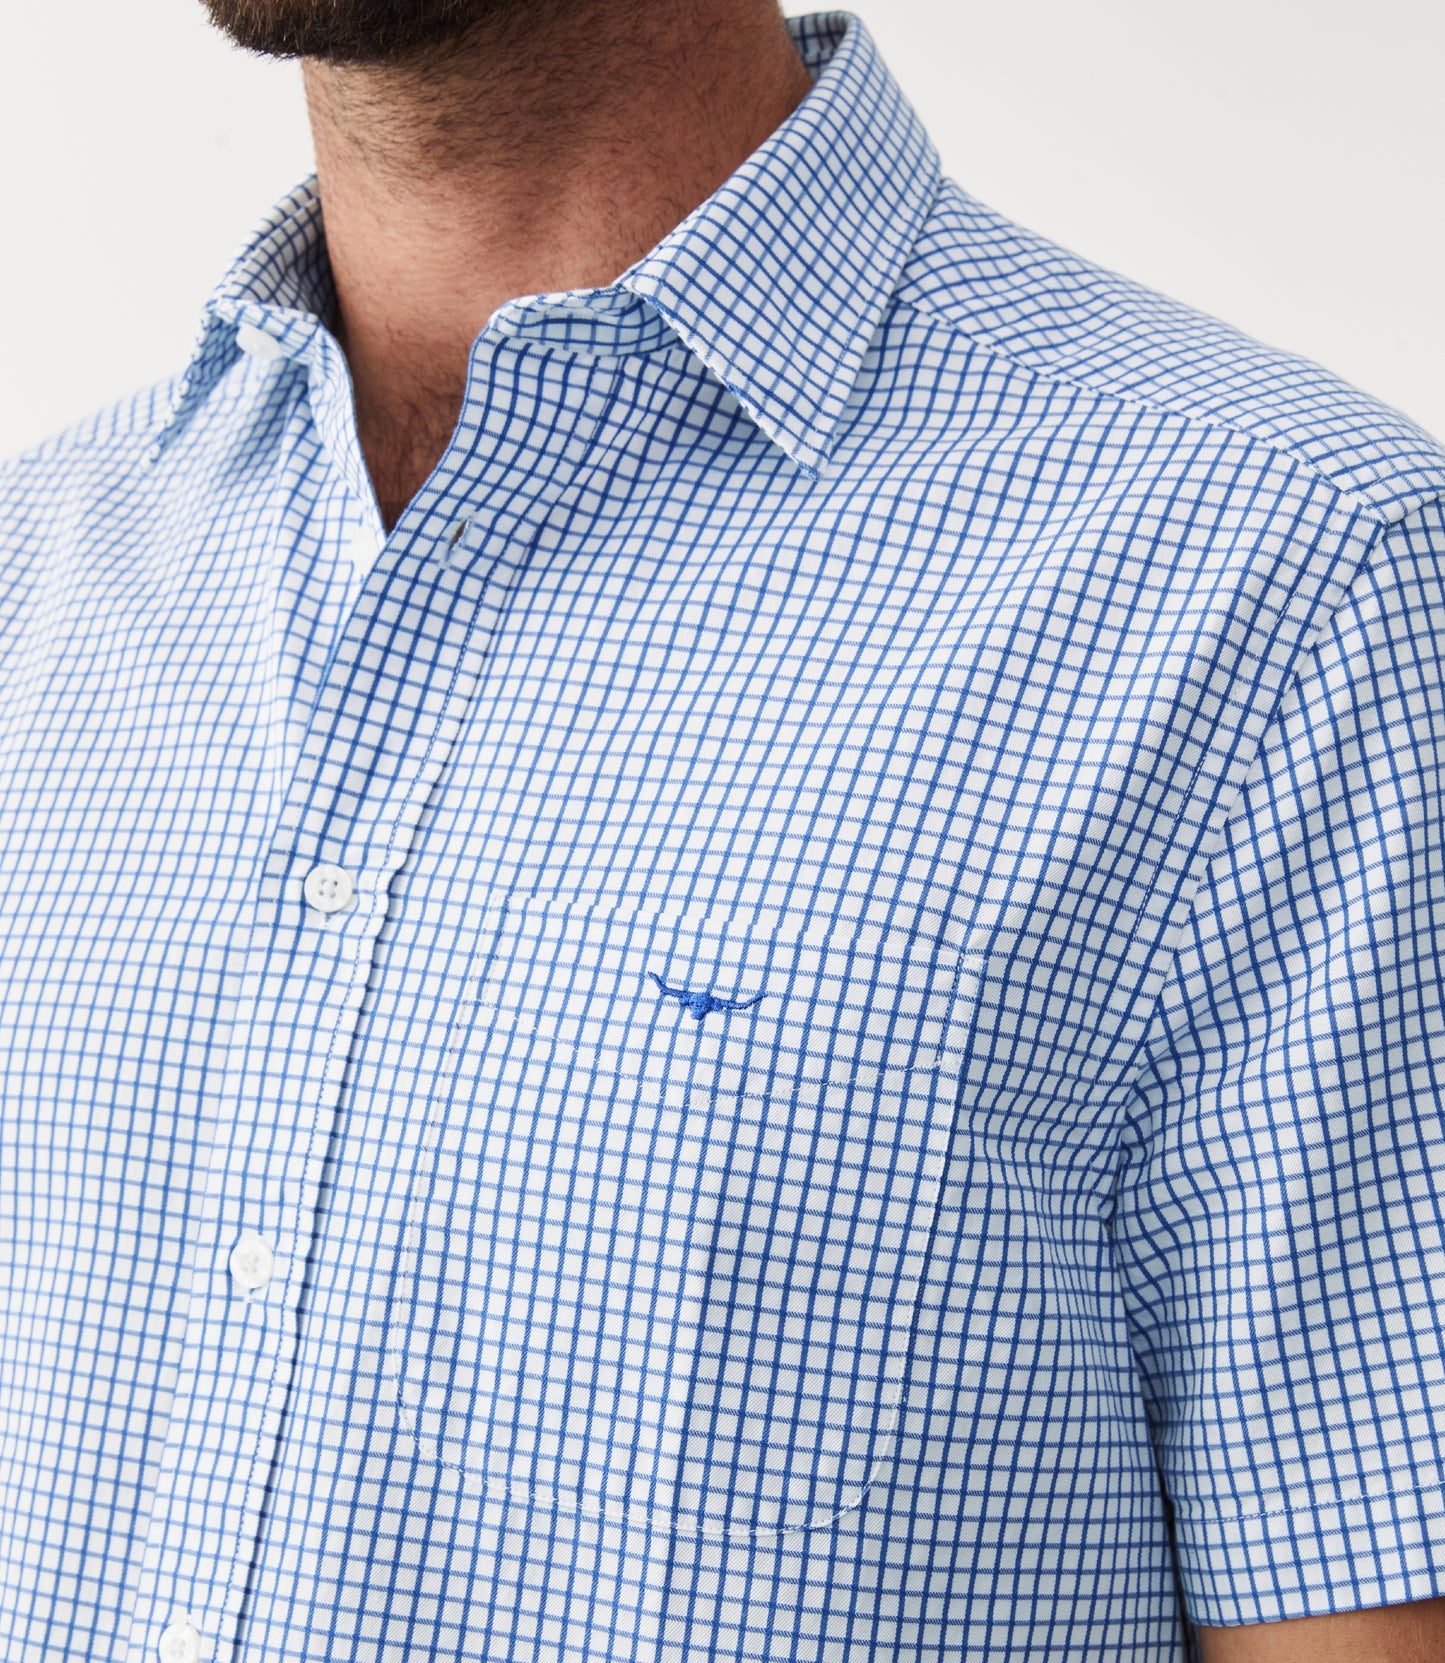 R.M. Williams, the Hervey Shirt in White Blue